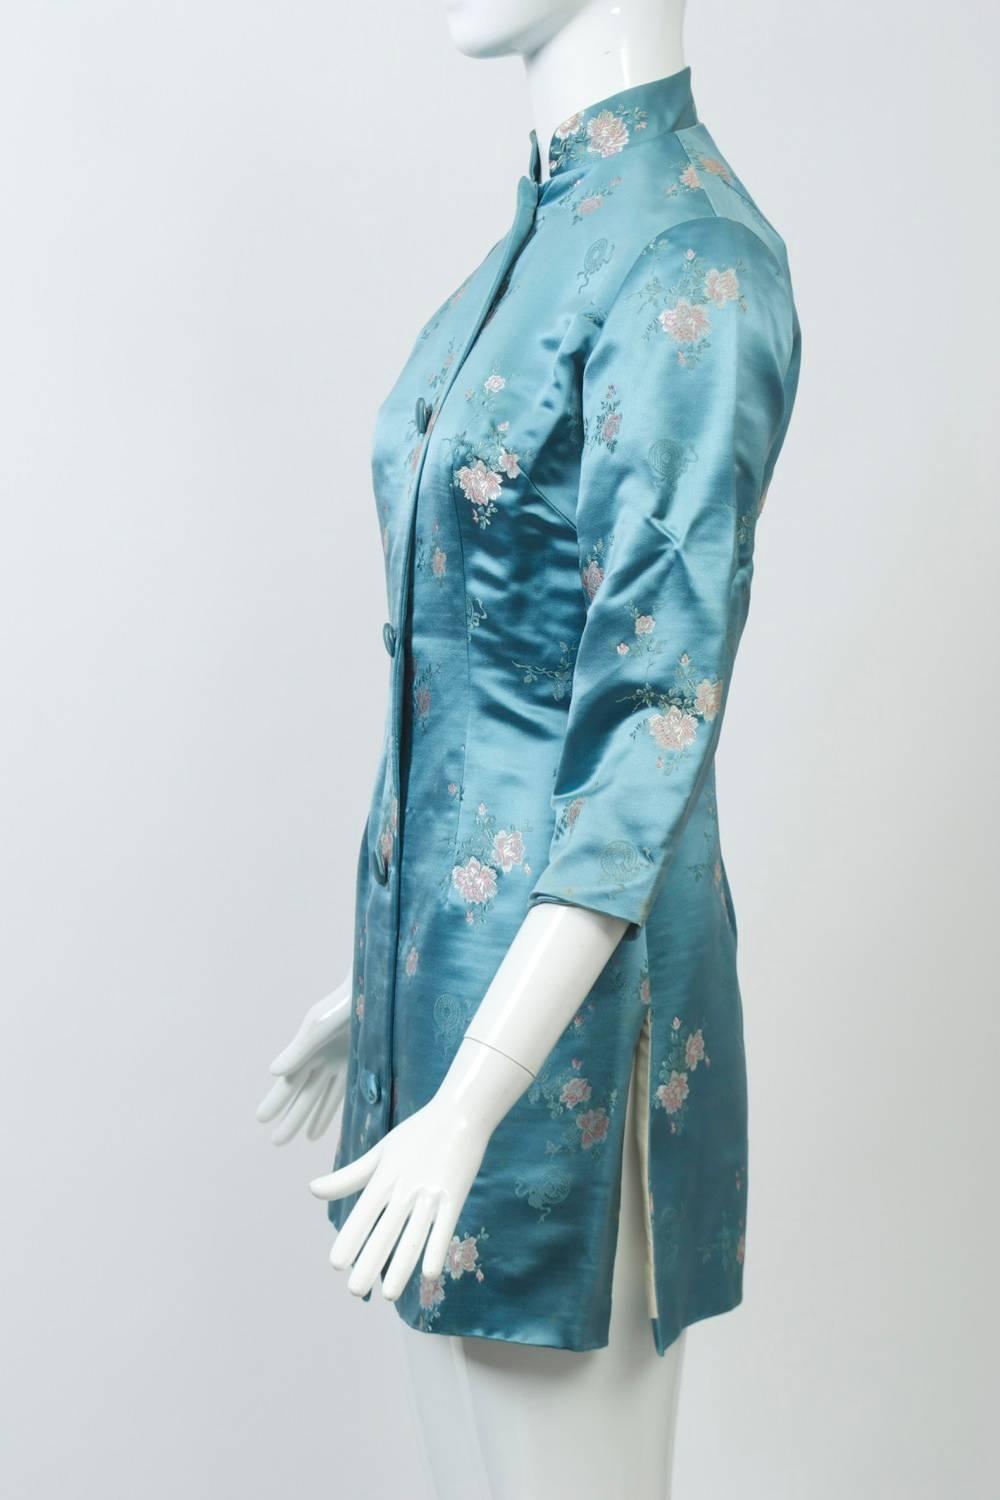 One of the best combinations we've seen for one of these vintage Hong Kong pieces from the 1960s. The brocade tunic jacket, in a beautiful shade of medium blue, has small flowers in pink, which complements the blush pink satin pants. A mandarin